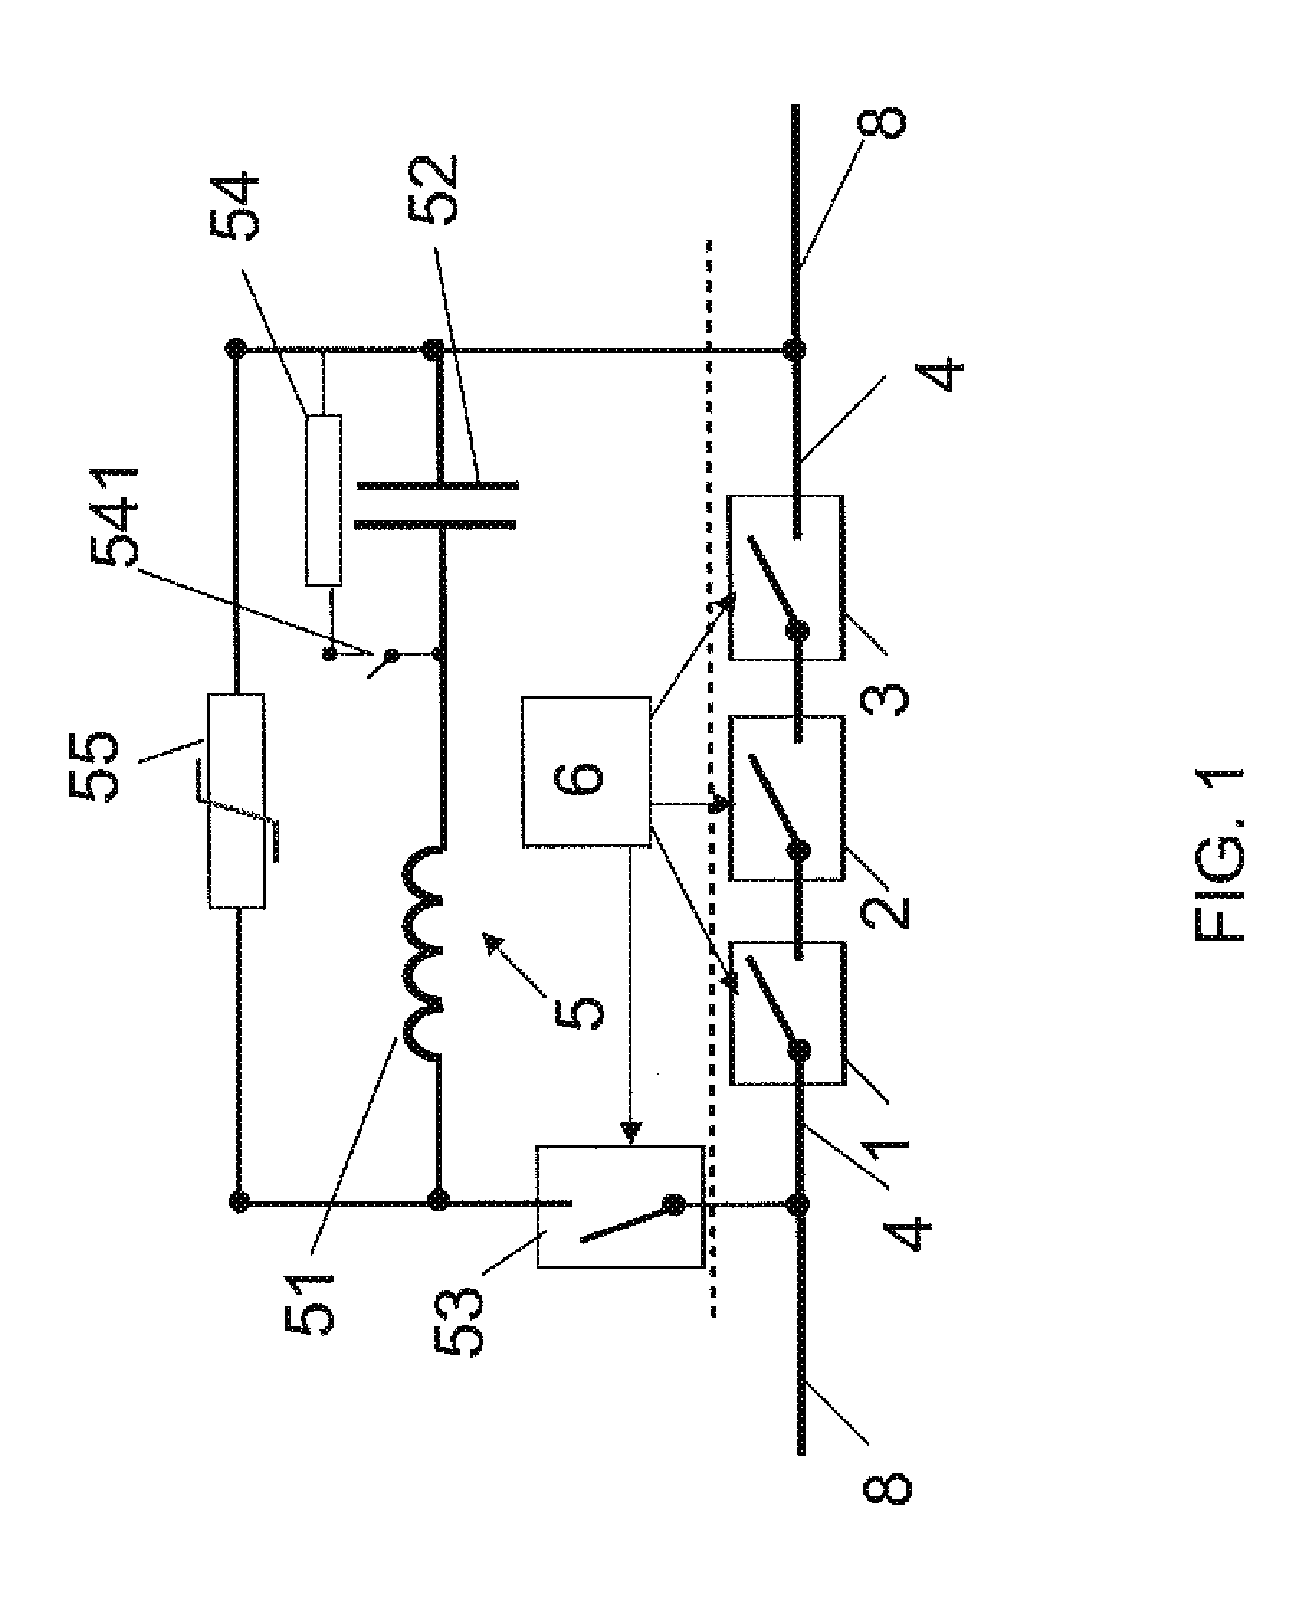 Circuit arrangement and method for interrupting a current flow in a DC current path